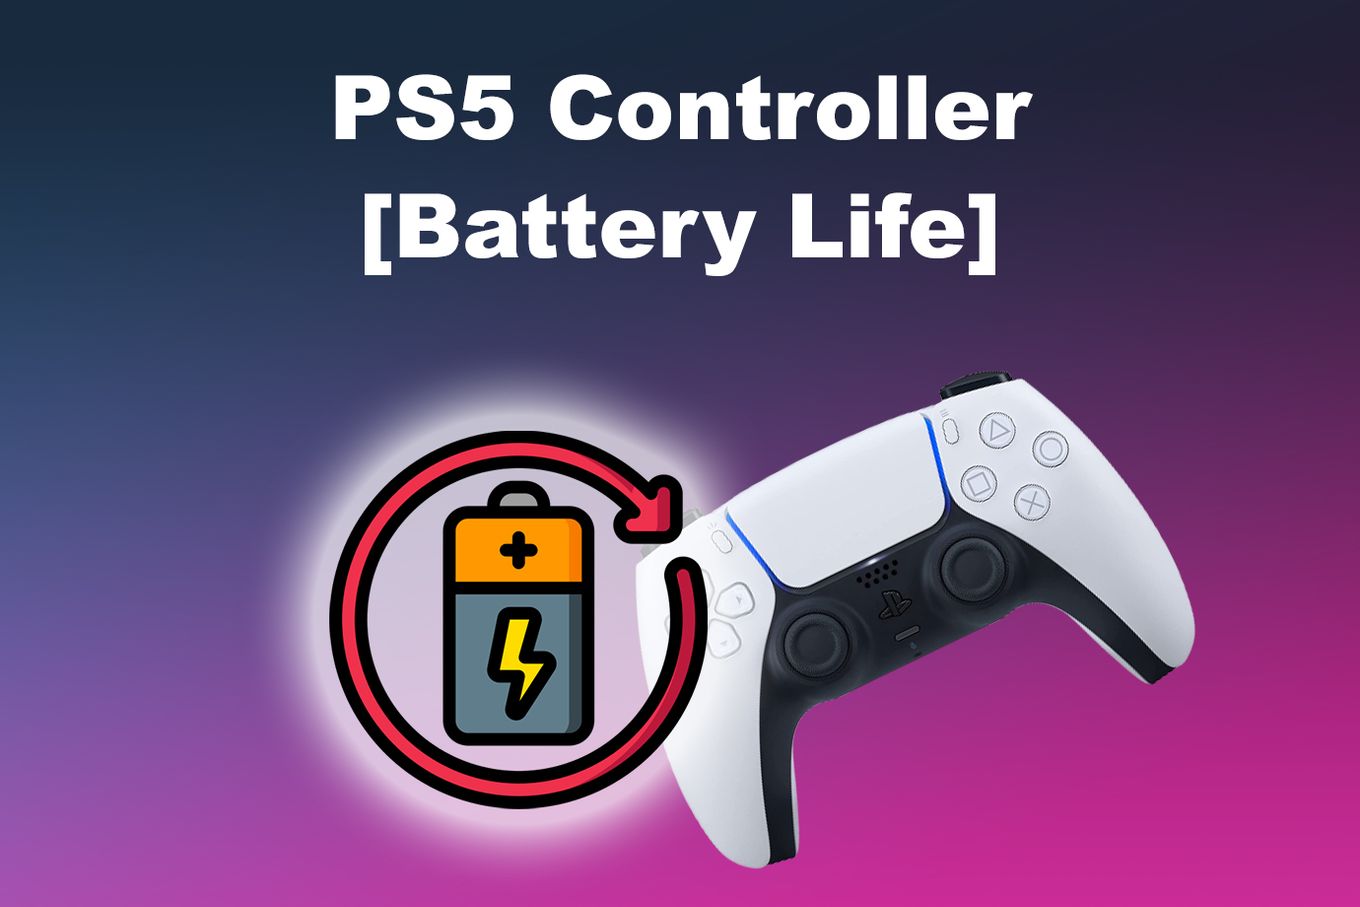 PS5 V2 DualSense controller with longer battery life listed by